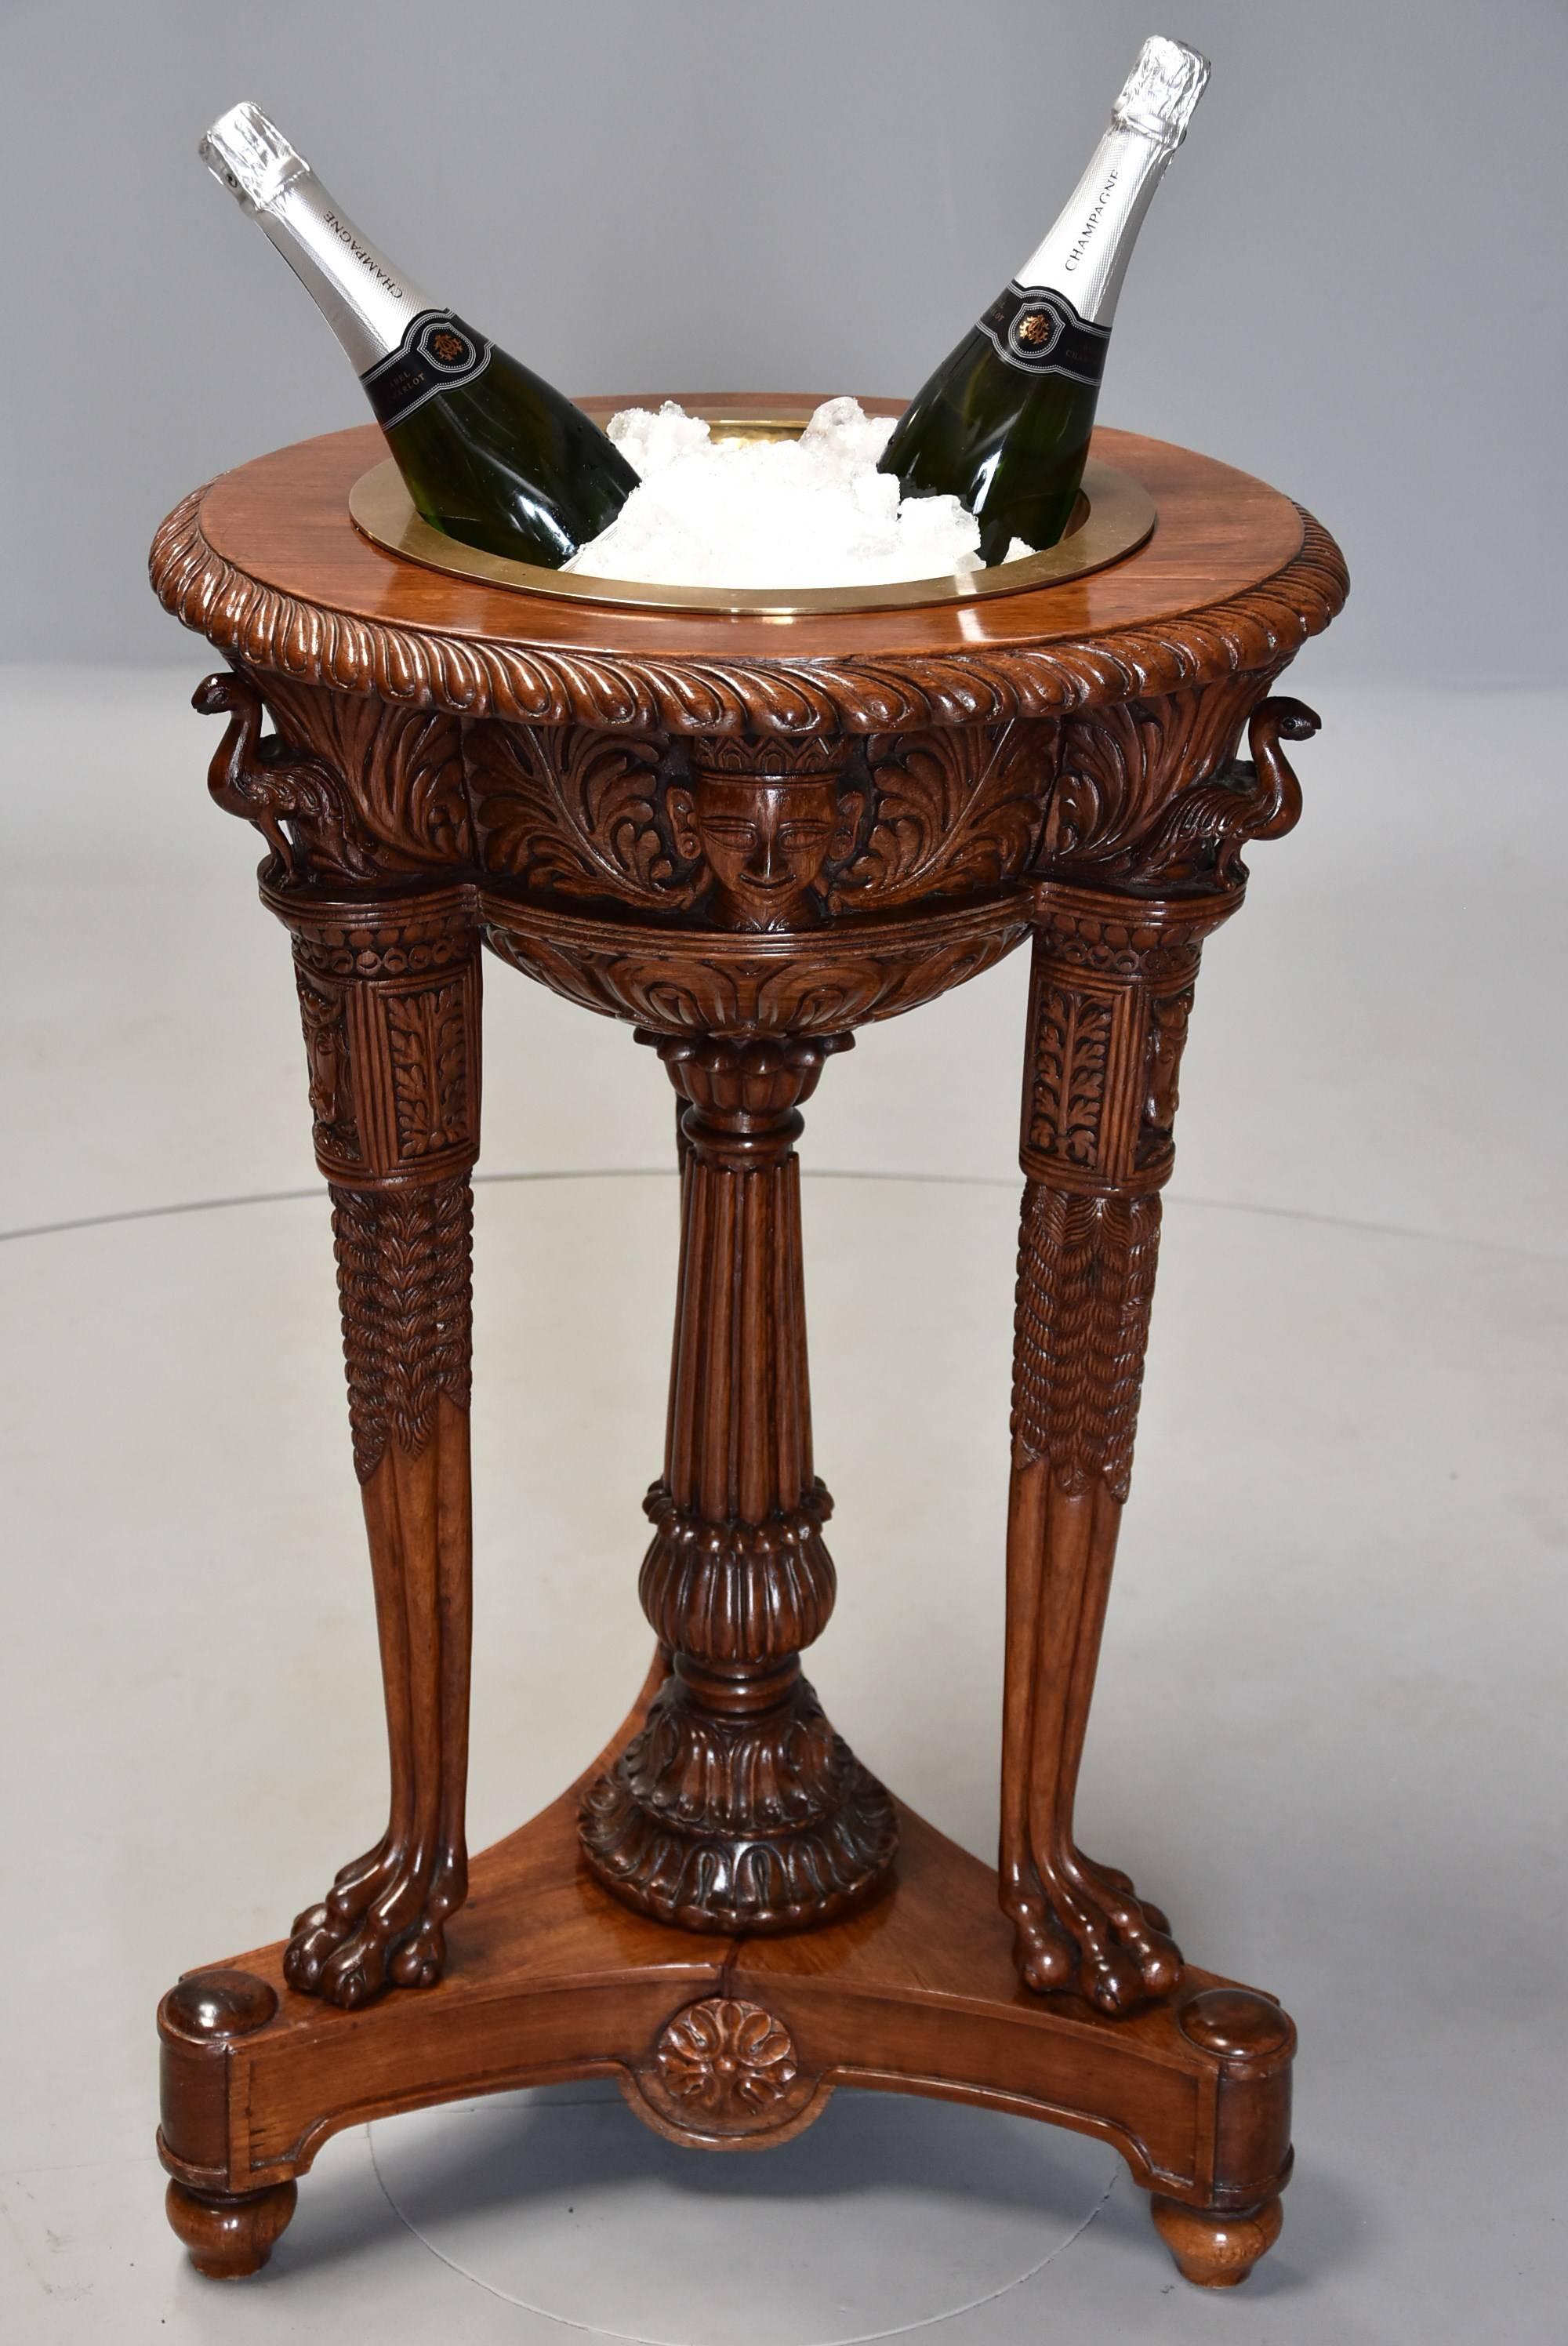 19th Century Highly Decorative Indian hardwood Carved Jardiniere/Wine Cooler For Sale 2